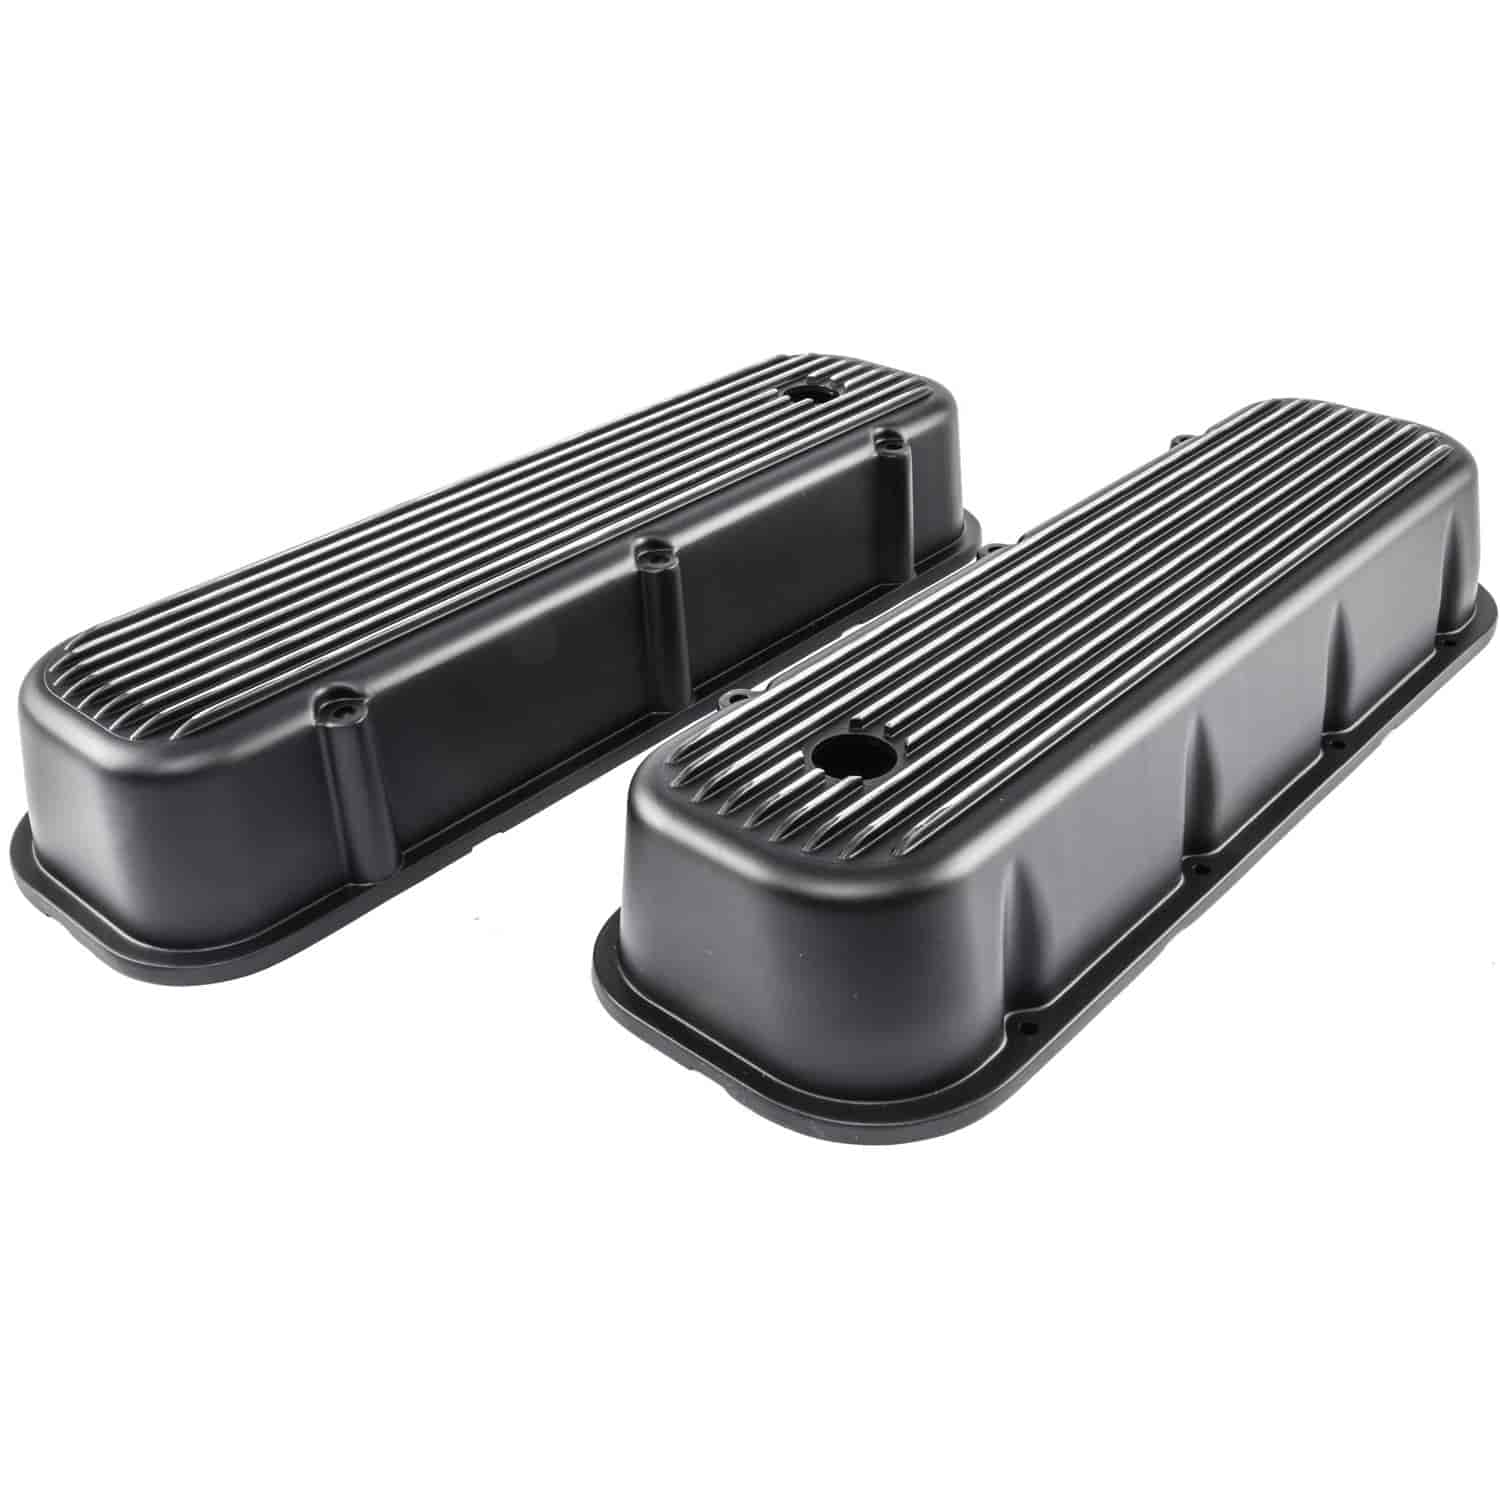 Black Finned Valve Covers for 1965-1995 Big Block Chevy